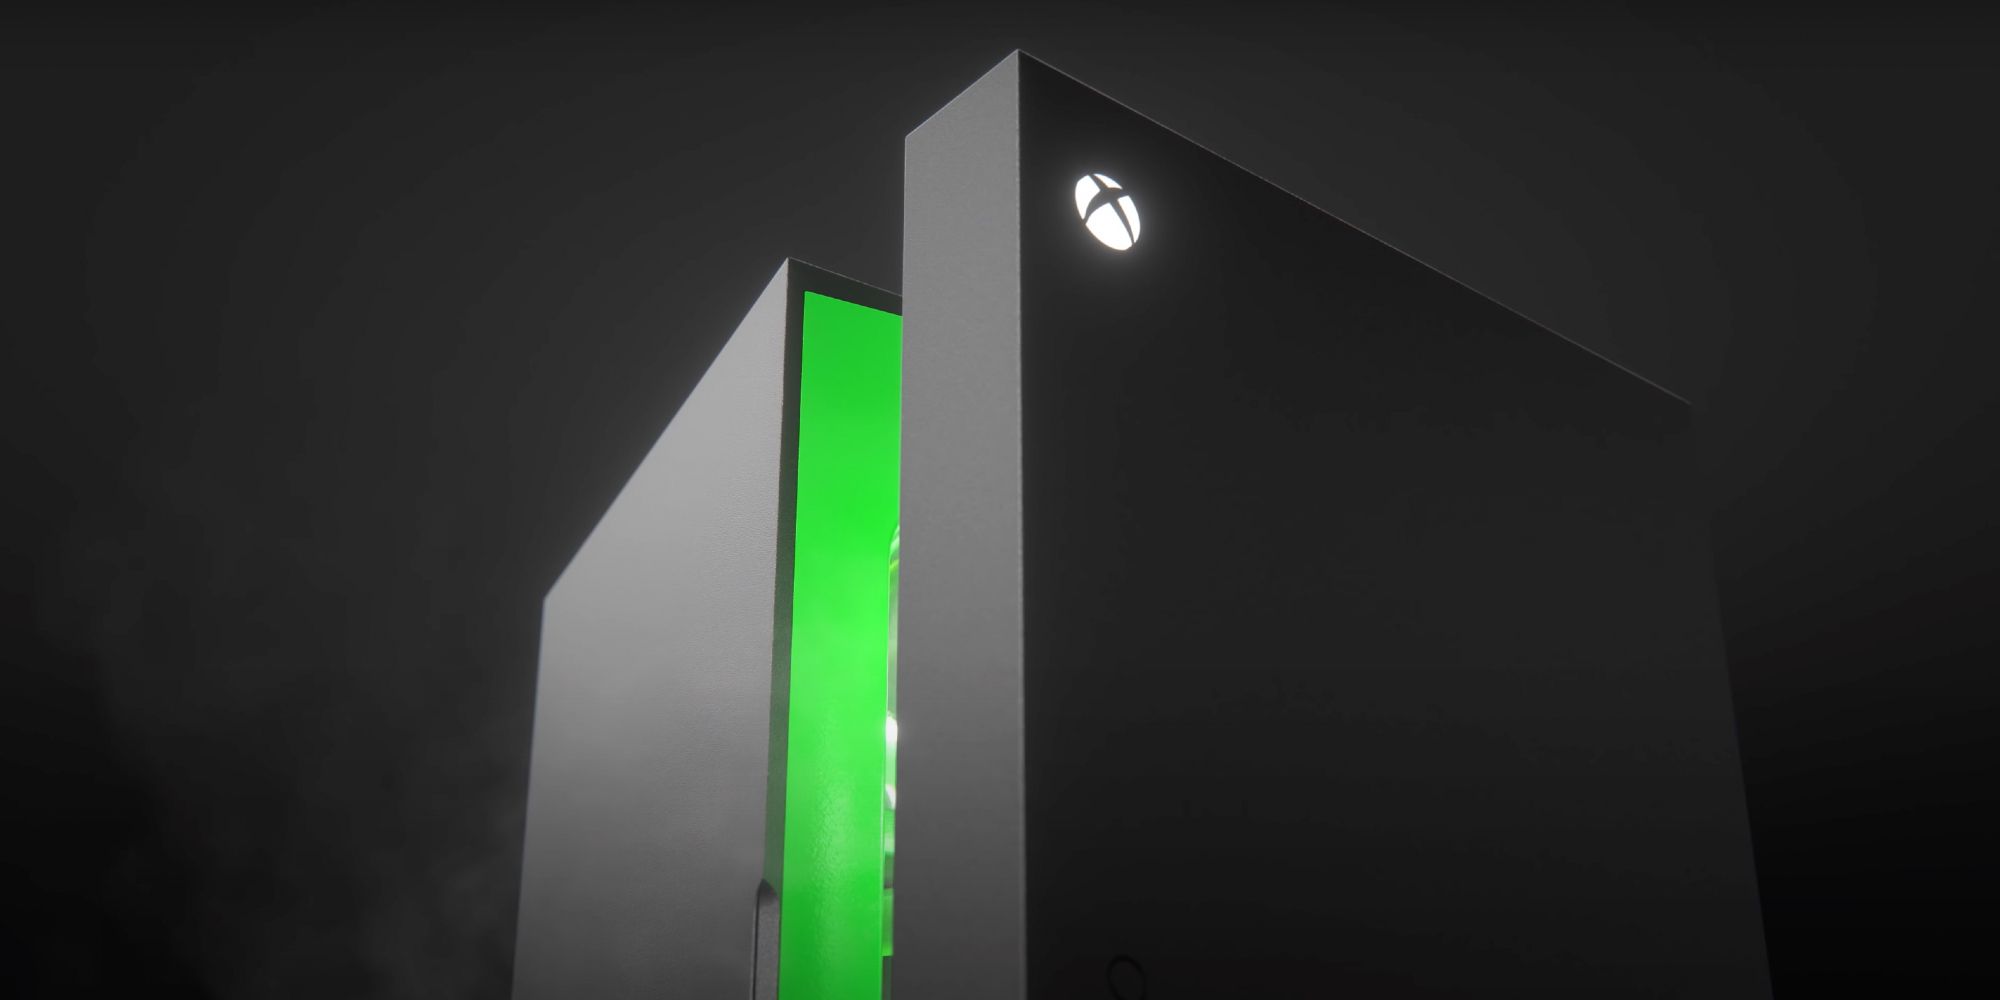 Is Xbox Really Selling an Xbox Fridge